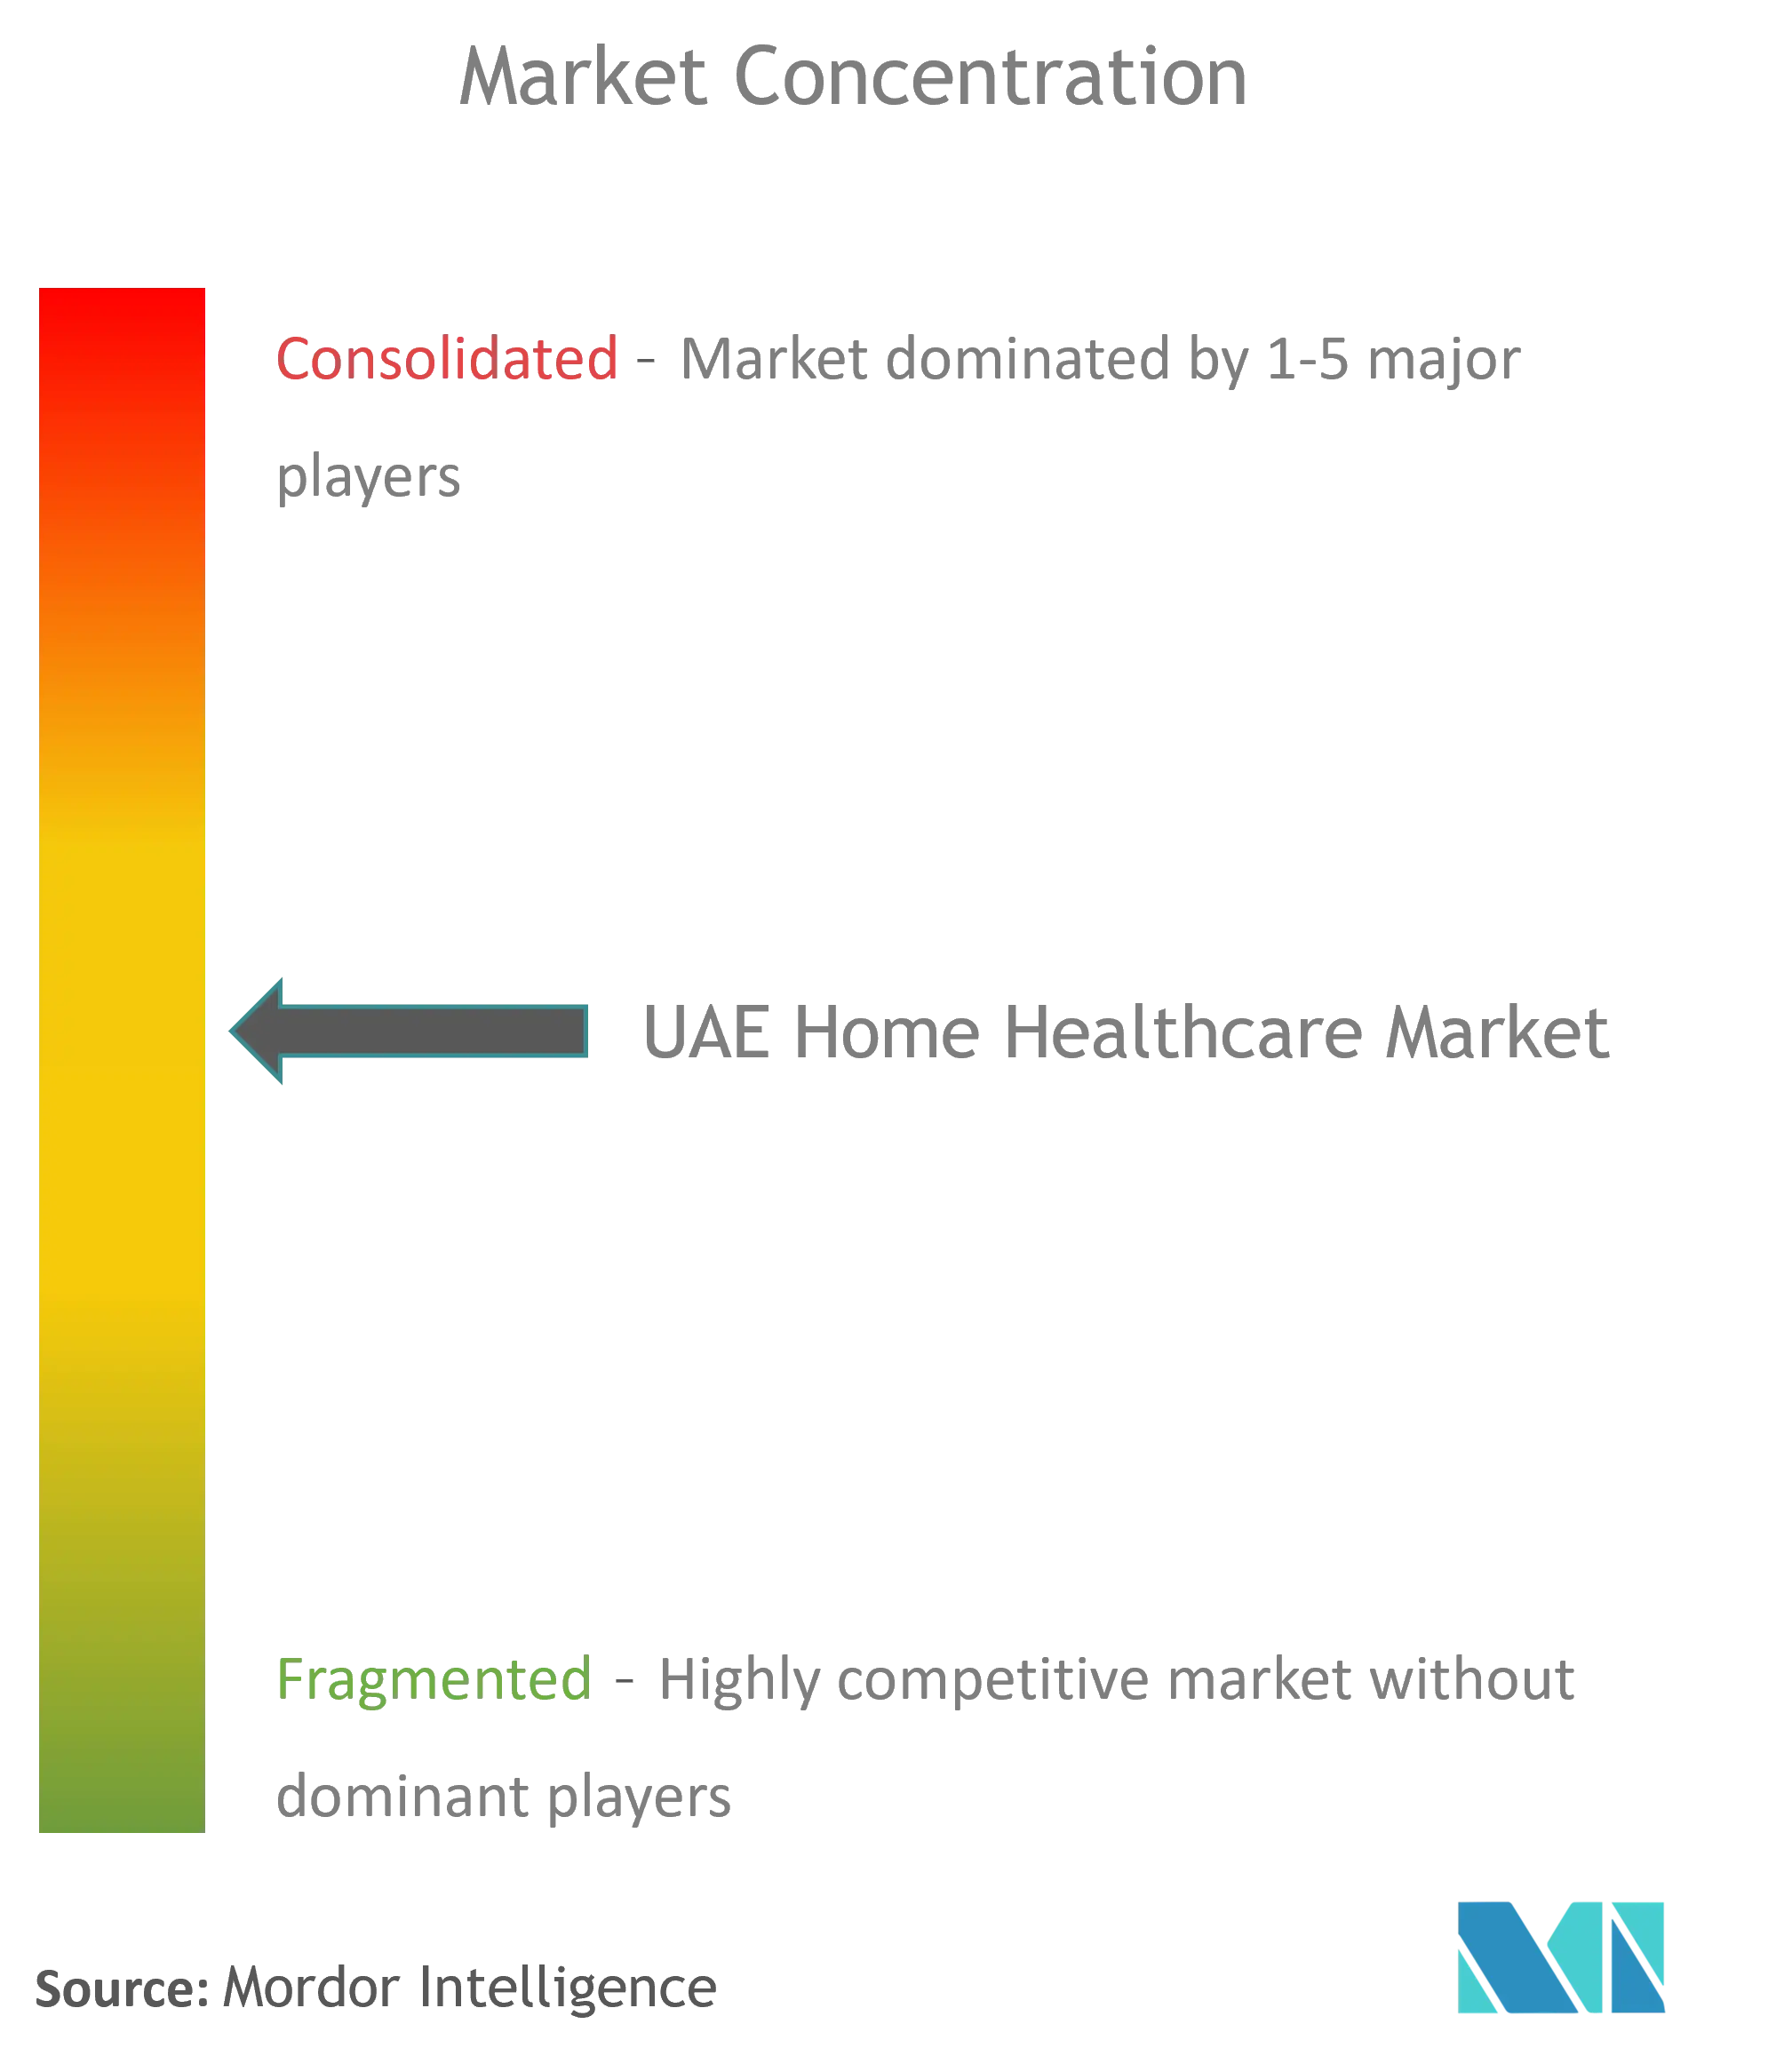 UAE Home Healthcare Industry Concentration